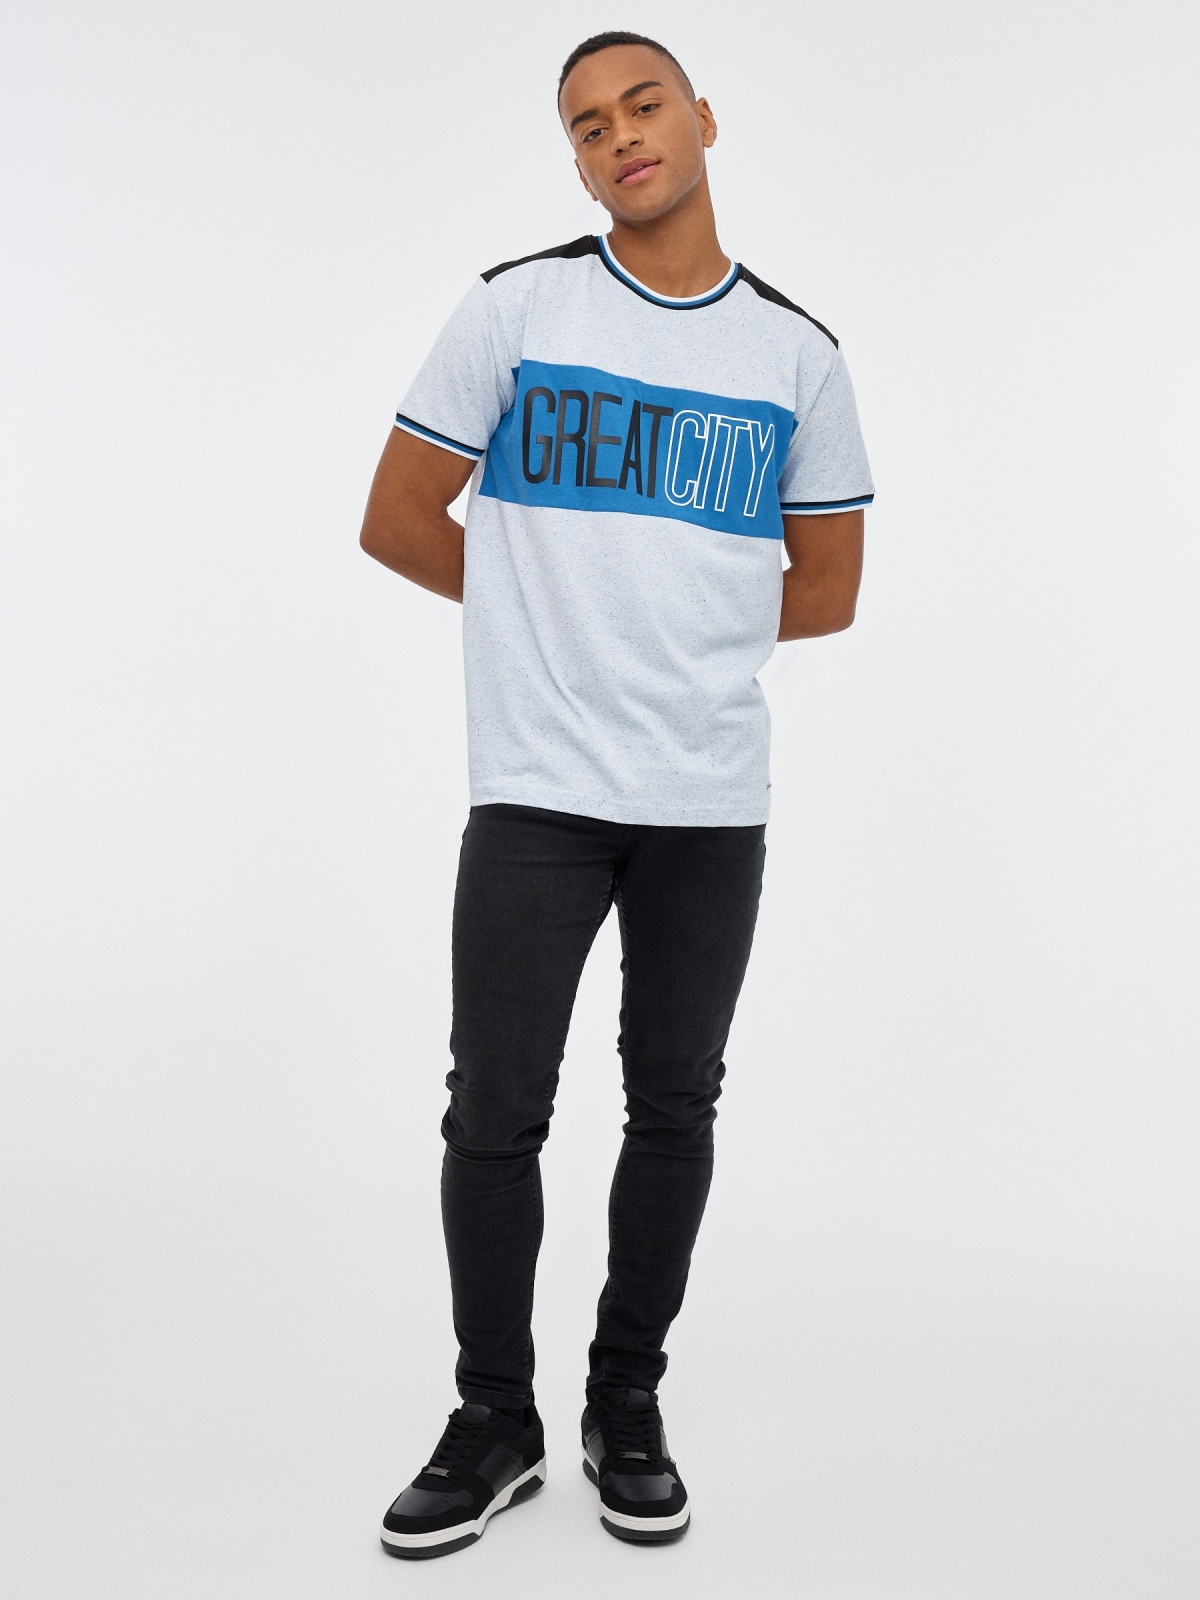 Greatcity T-shirt white front view